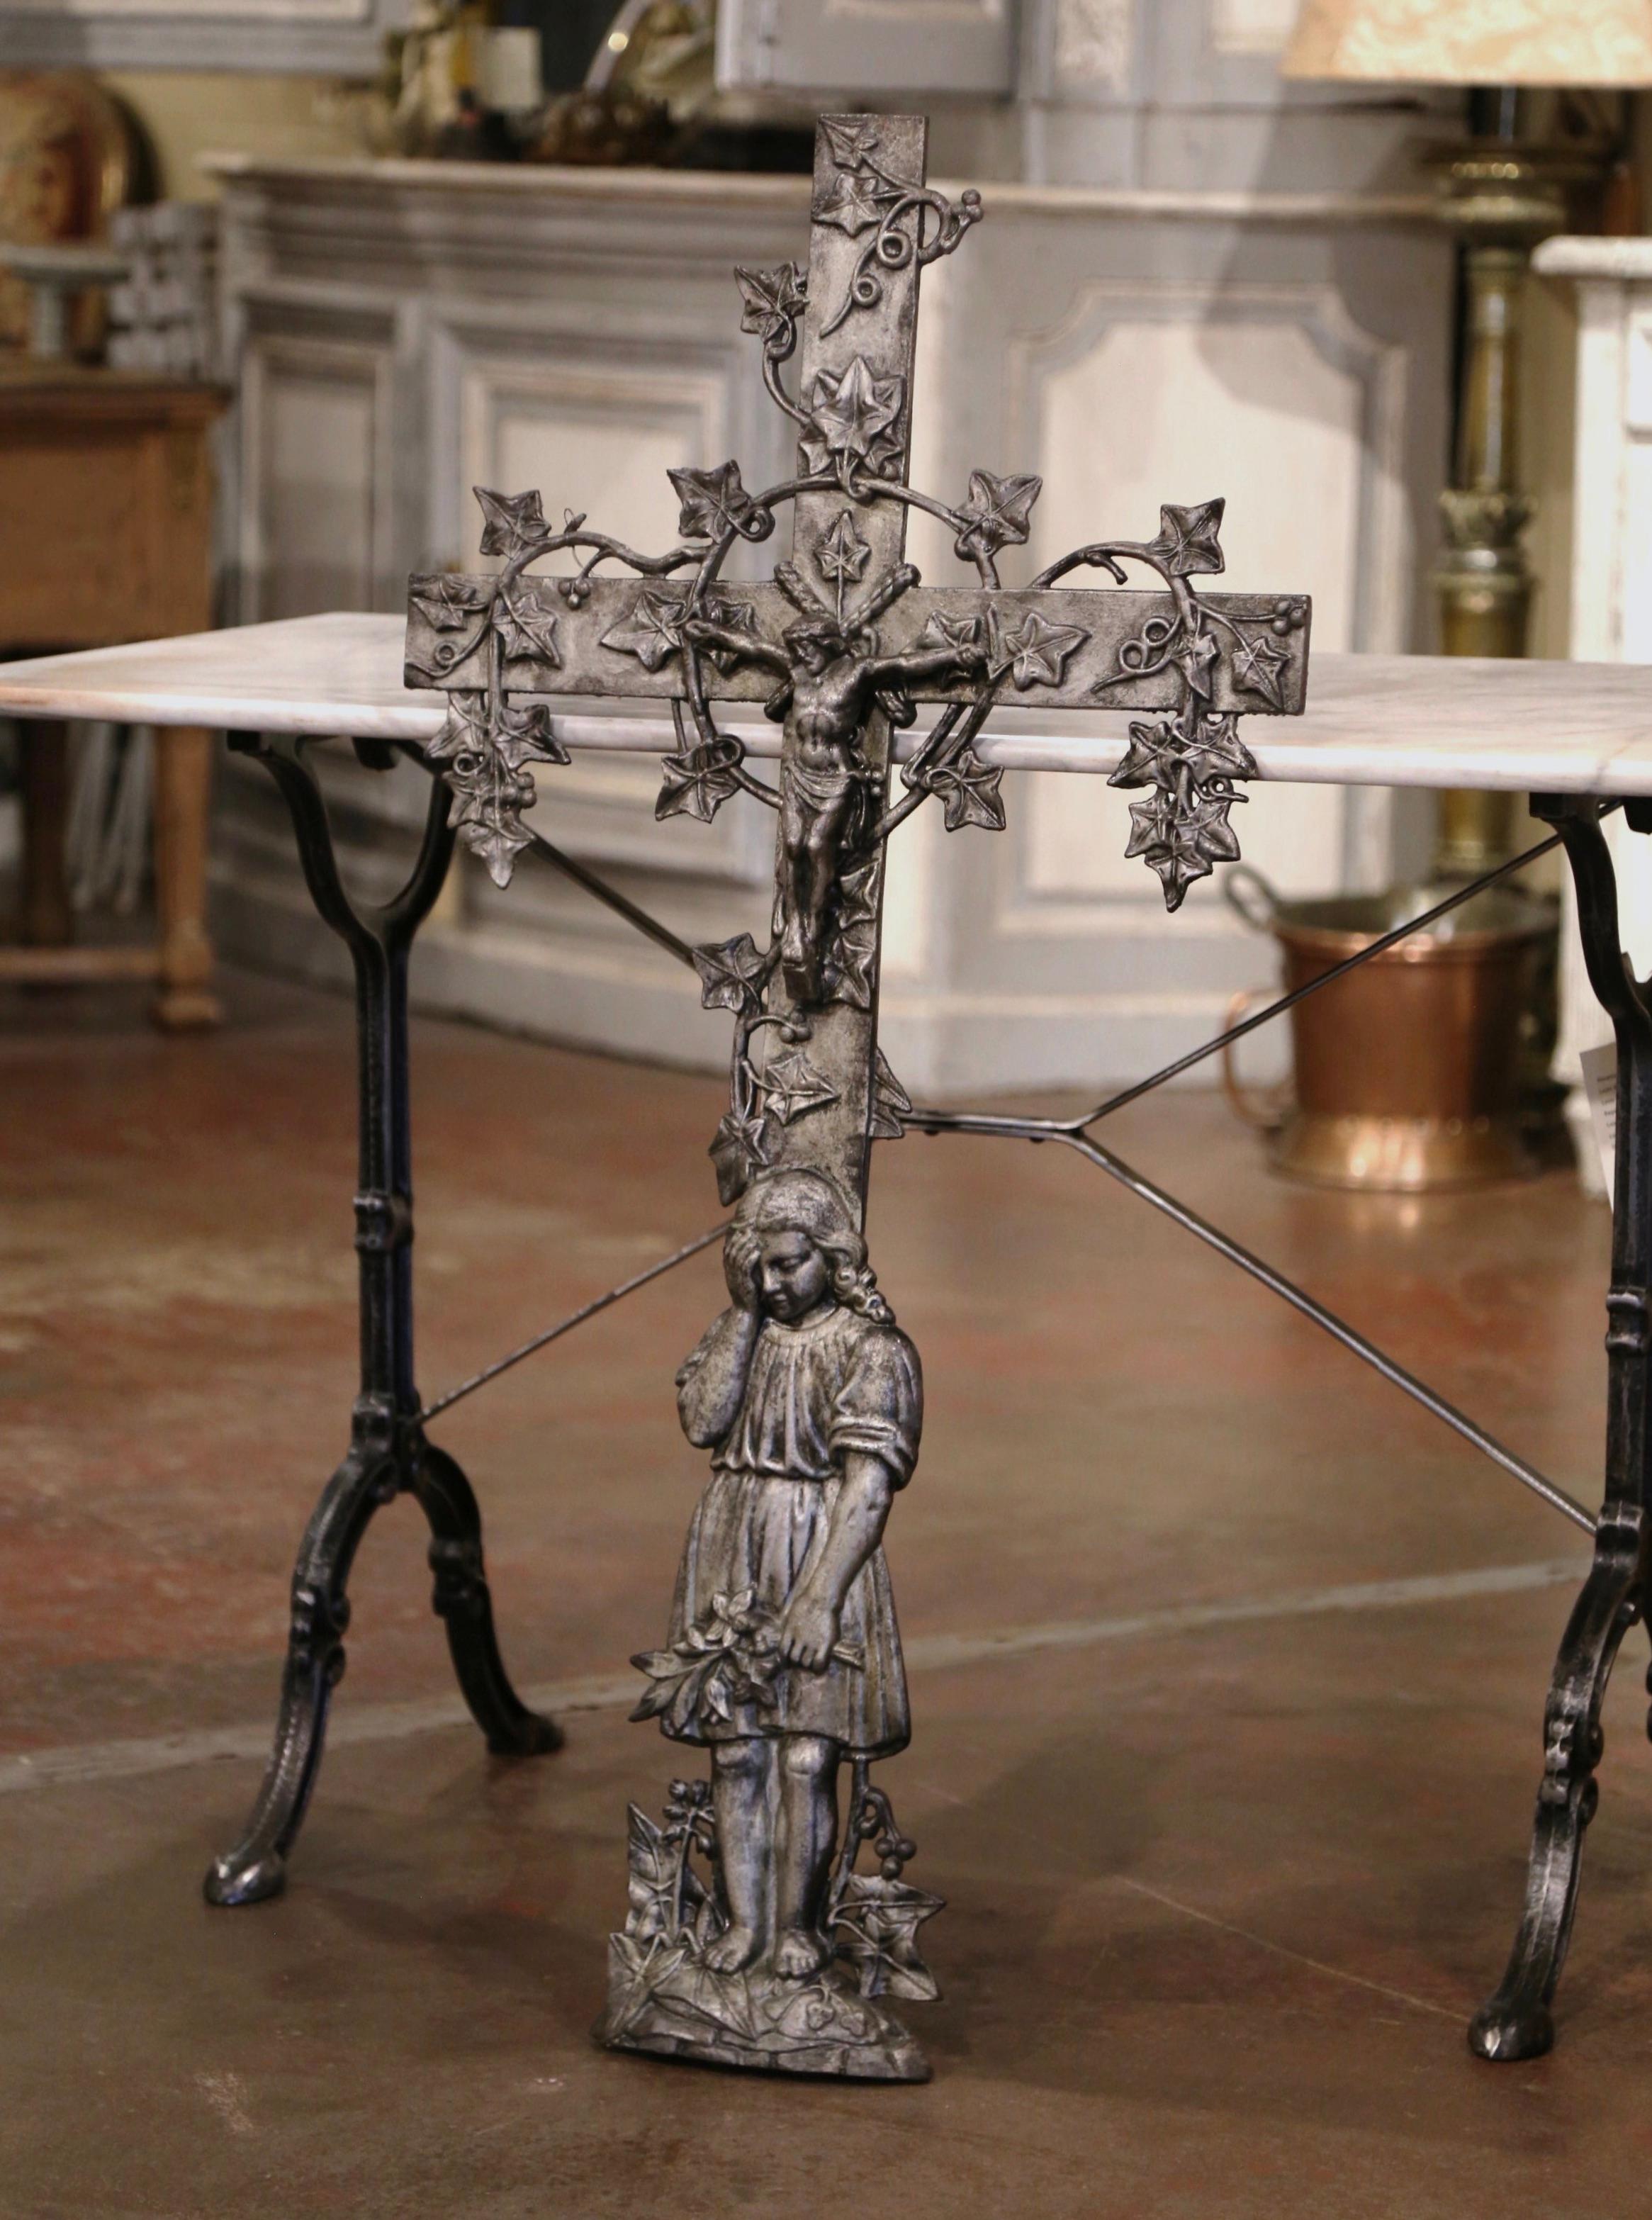 This beautiful, antique cross was crafted in France, circa 1870. The large iron crucifix rests on an oval base, and features our Lord nailed on the cross; the cross is decorated with vine and reed motifs in high relief all throughout, and features a